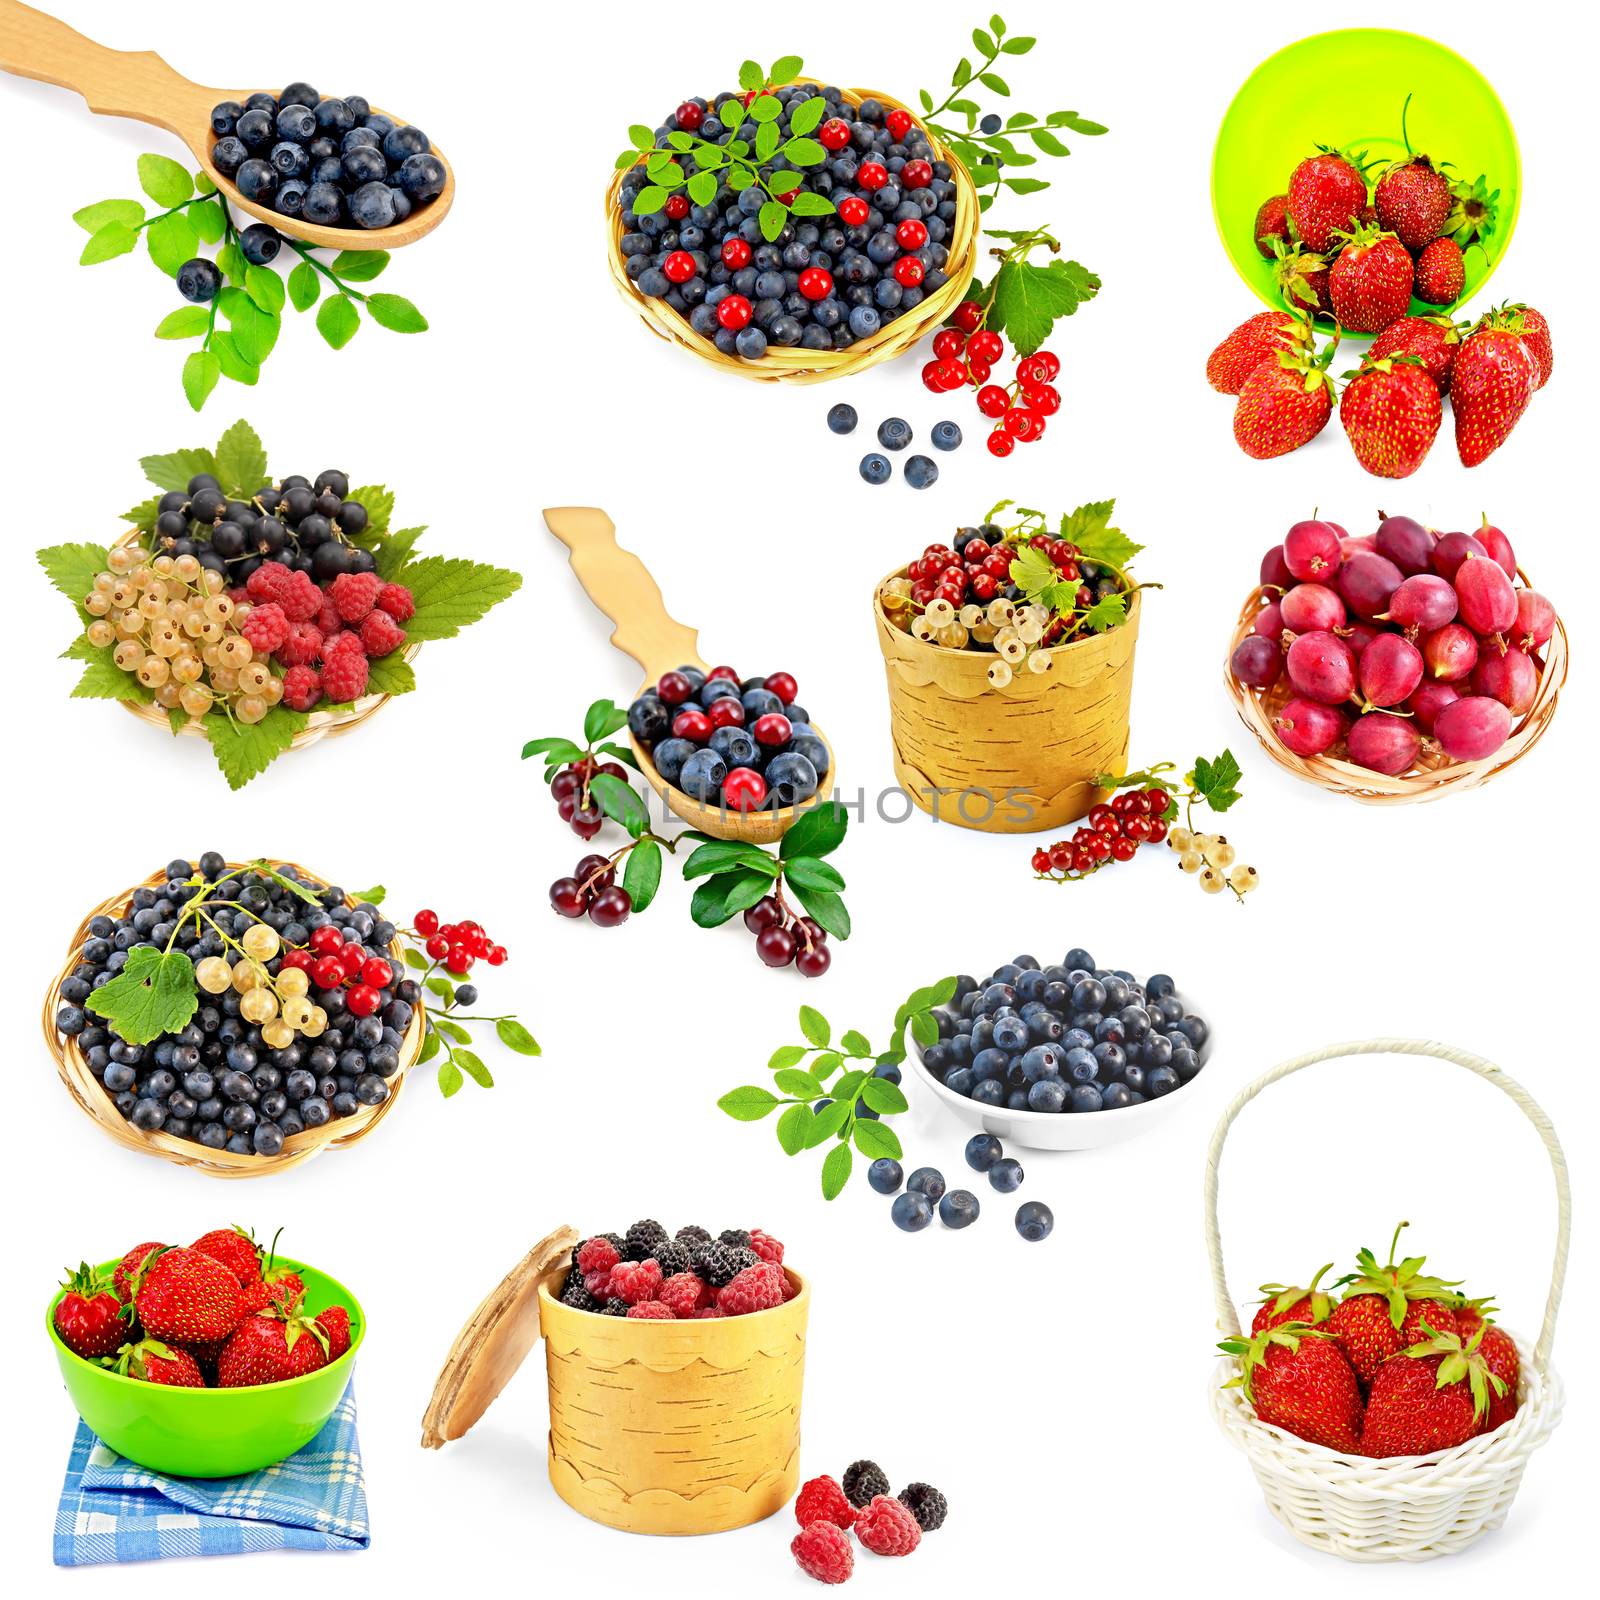 A set of photos of strawberries, cranberries, raspberries, blackberries, blueberries, white, black and red currants, gooseberries isolated on a white background